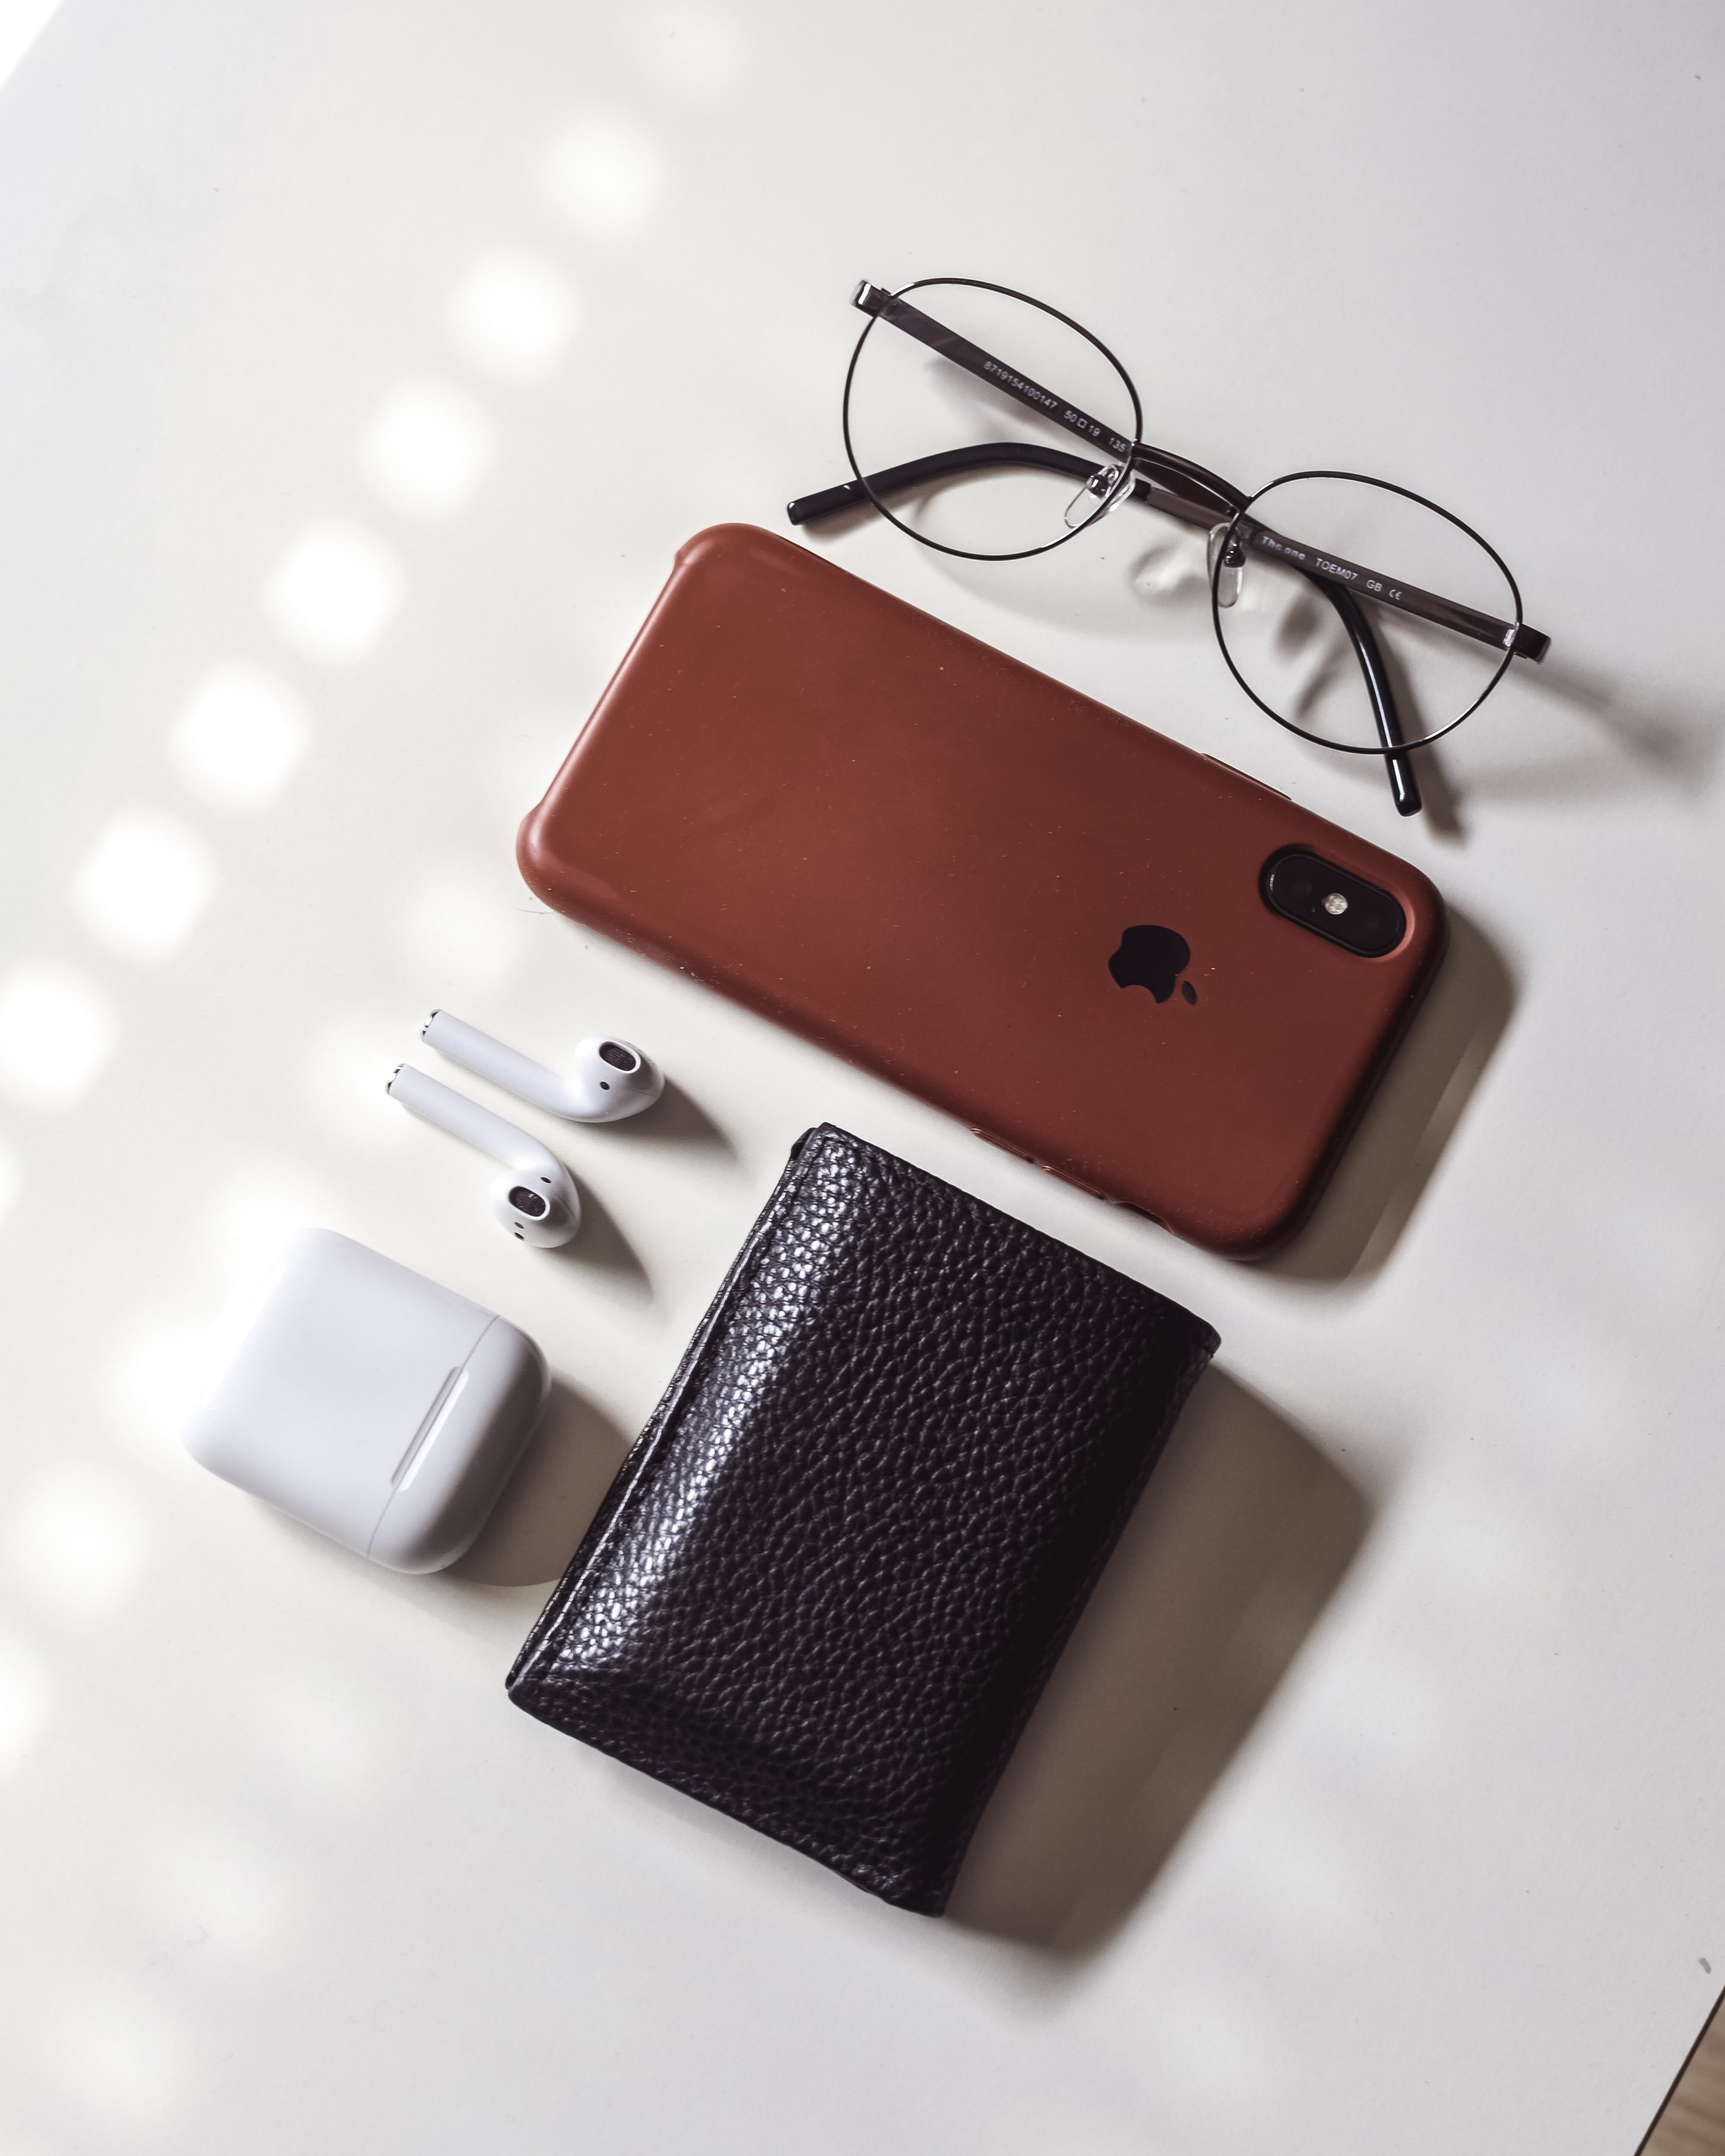 Glasses, an apple phone and headphones and wallet all sitting on a counter for the Discover It cash back review post. 